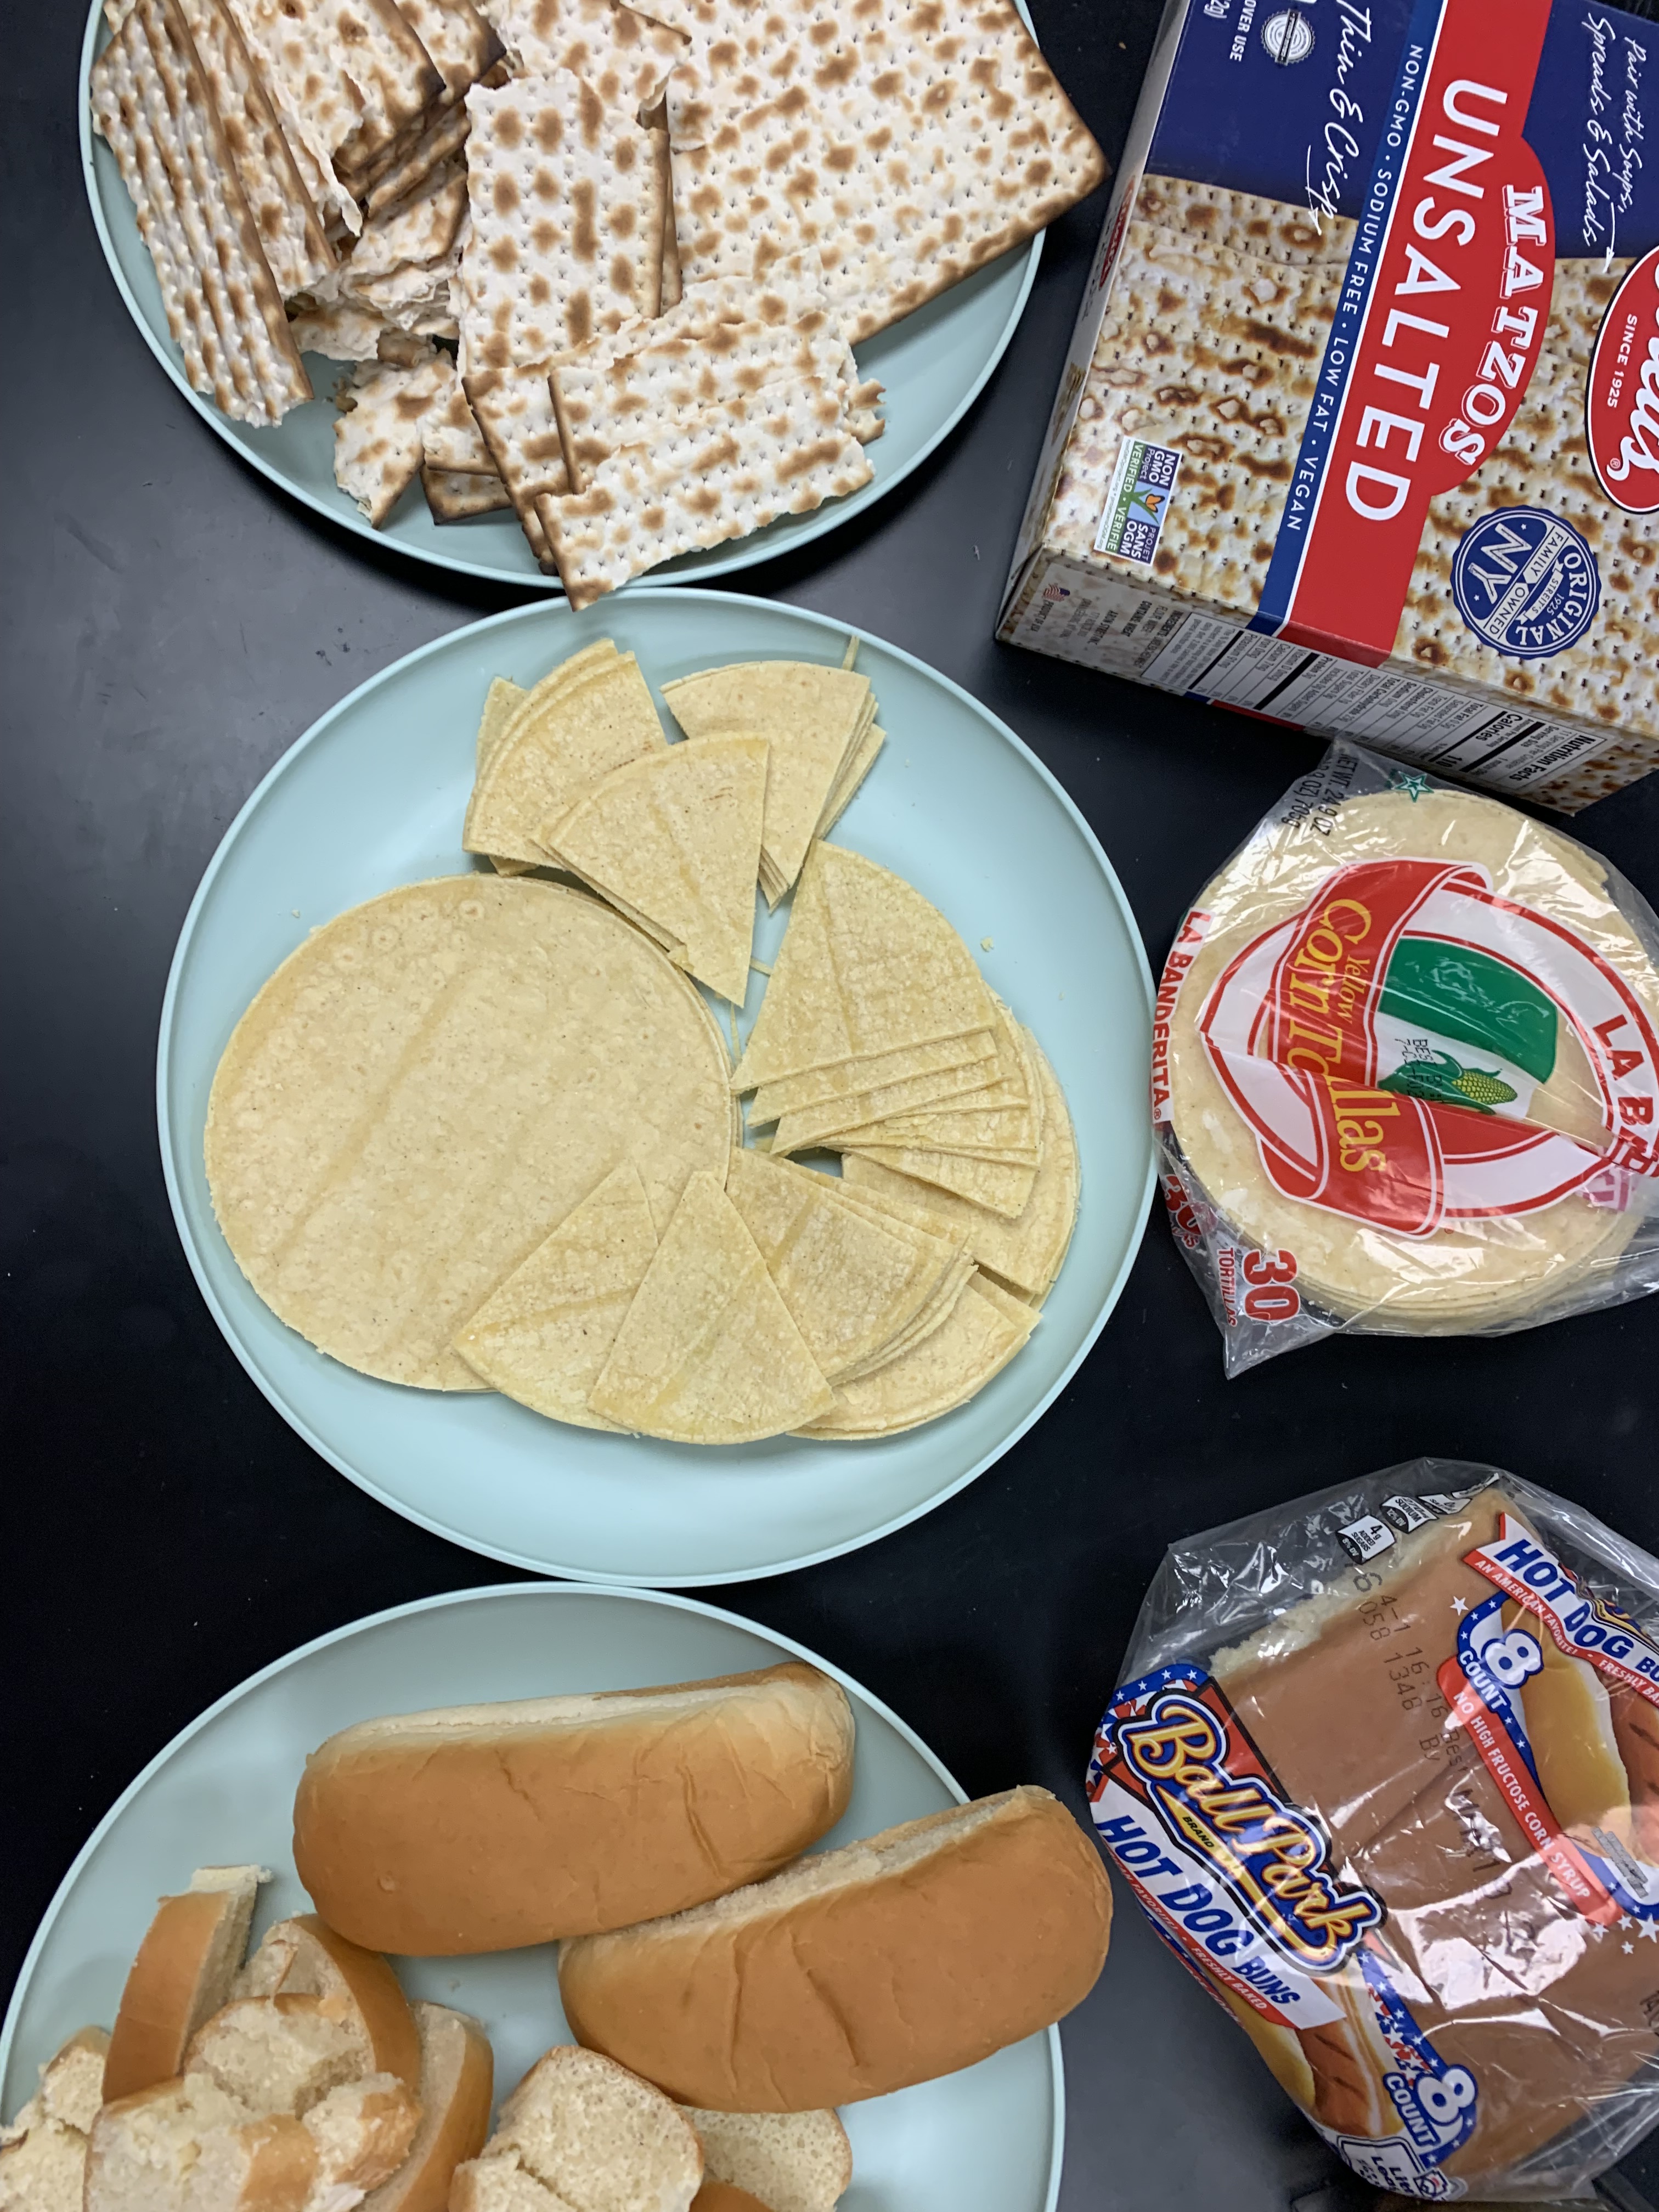 Food Anthro for Middle Schoolers: All About Bread